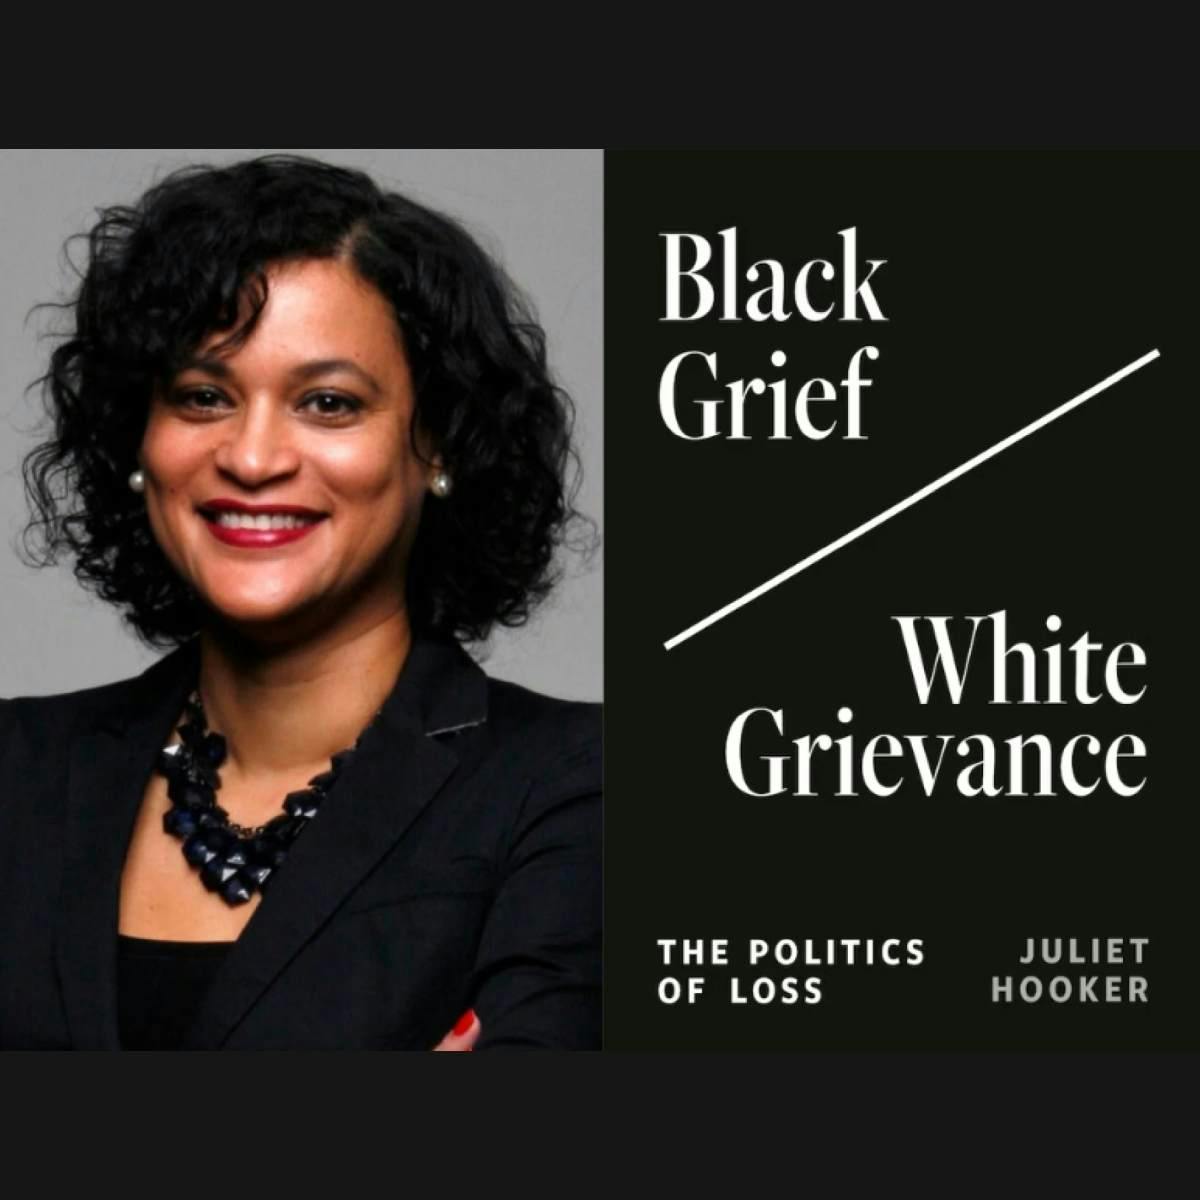 Black Grief, White Grievance, and the Politics of Loss